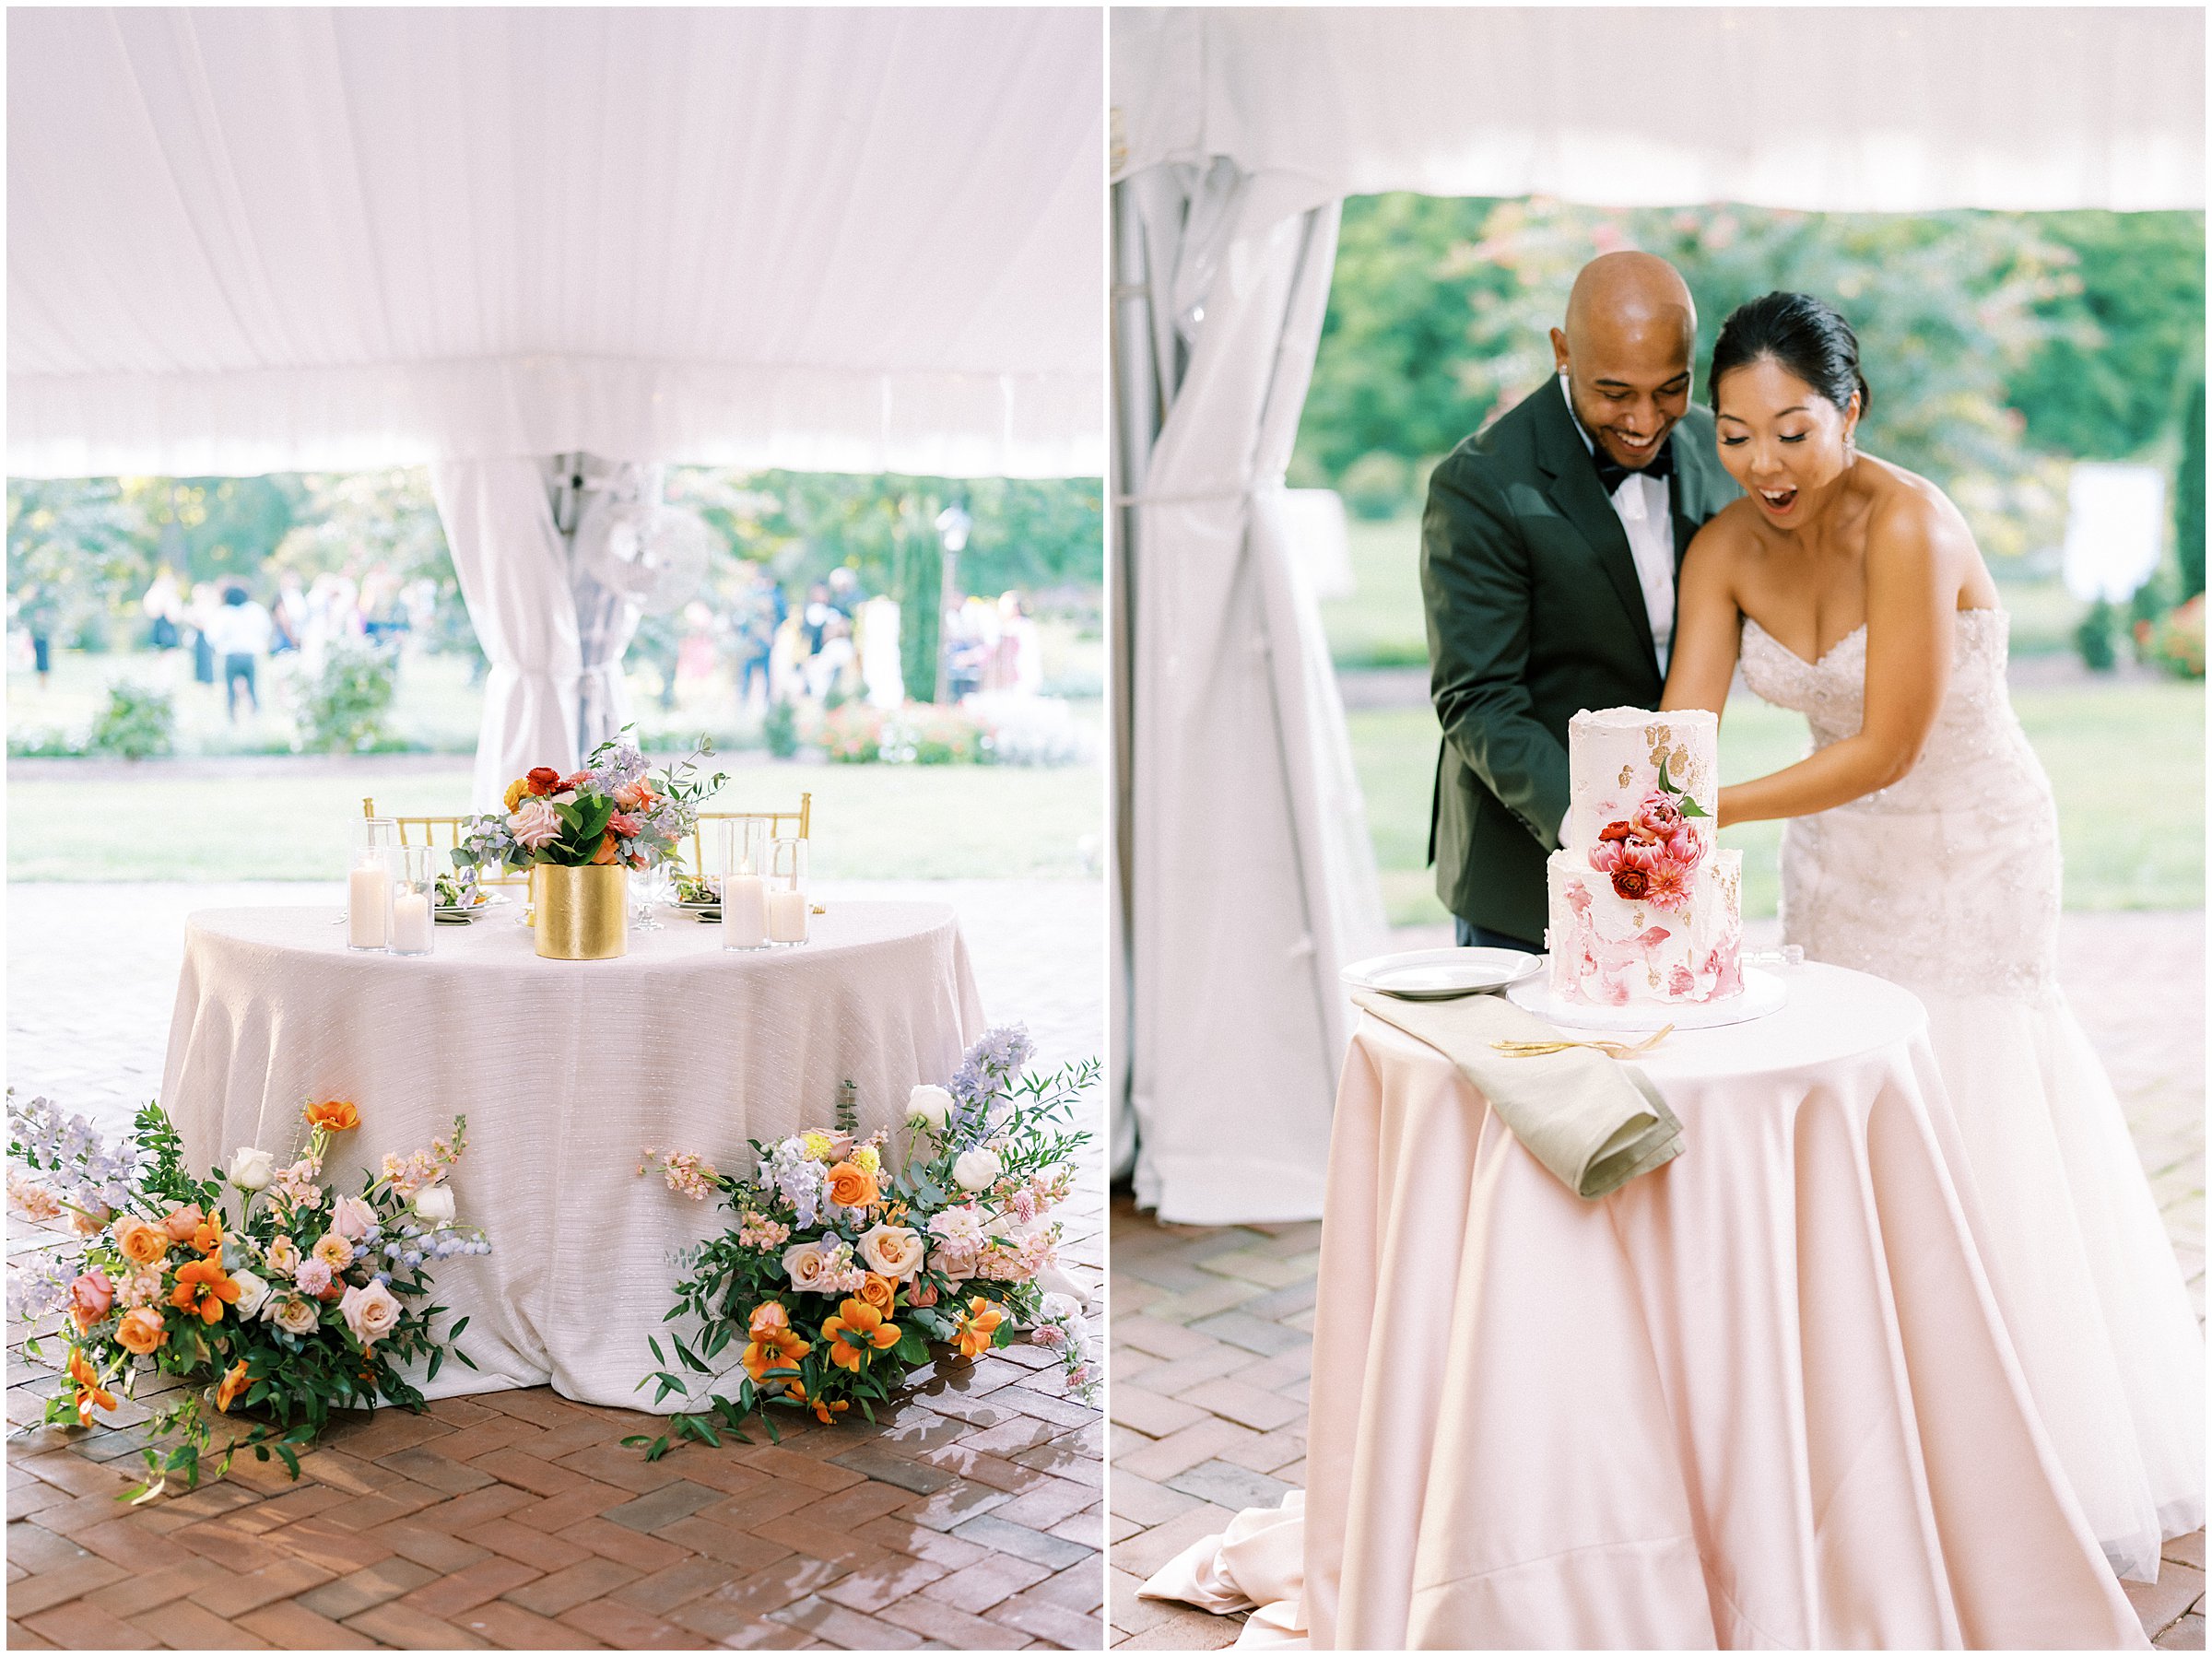 Bride and groom cut cake at Belmont Manor wedding. Captured by Winnie Dora Photography.